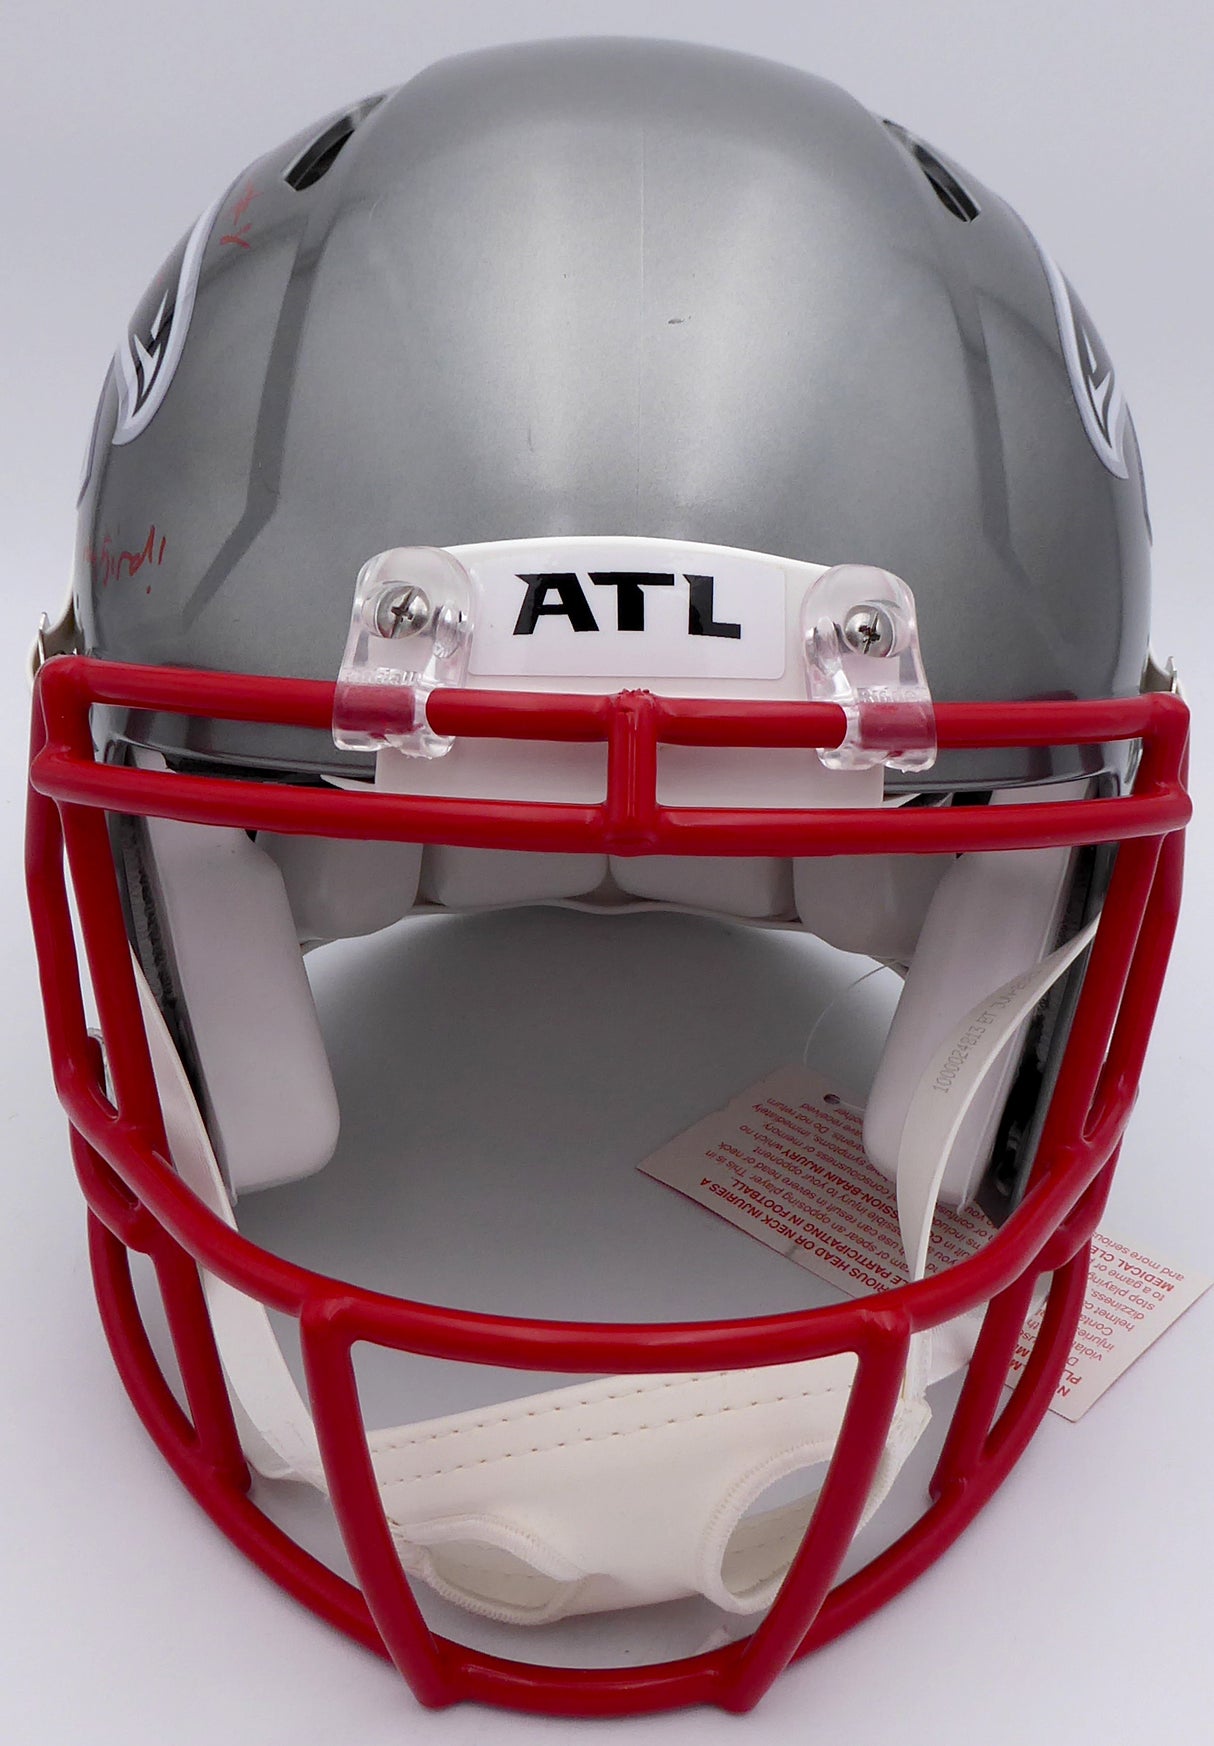 Kyle Pitts Autographed Atlanta Falcons Flash Silver Full Size Authentic Speed Helmet "Dirty Bird" (Smudge) Beckett BAS QR #WL25817